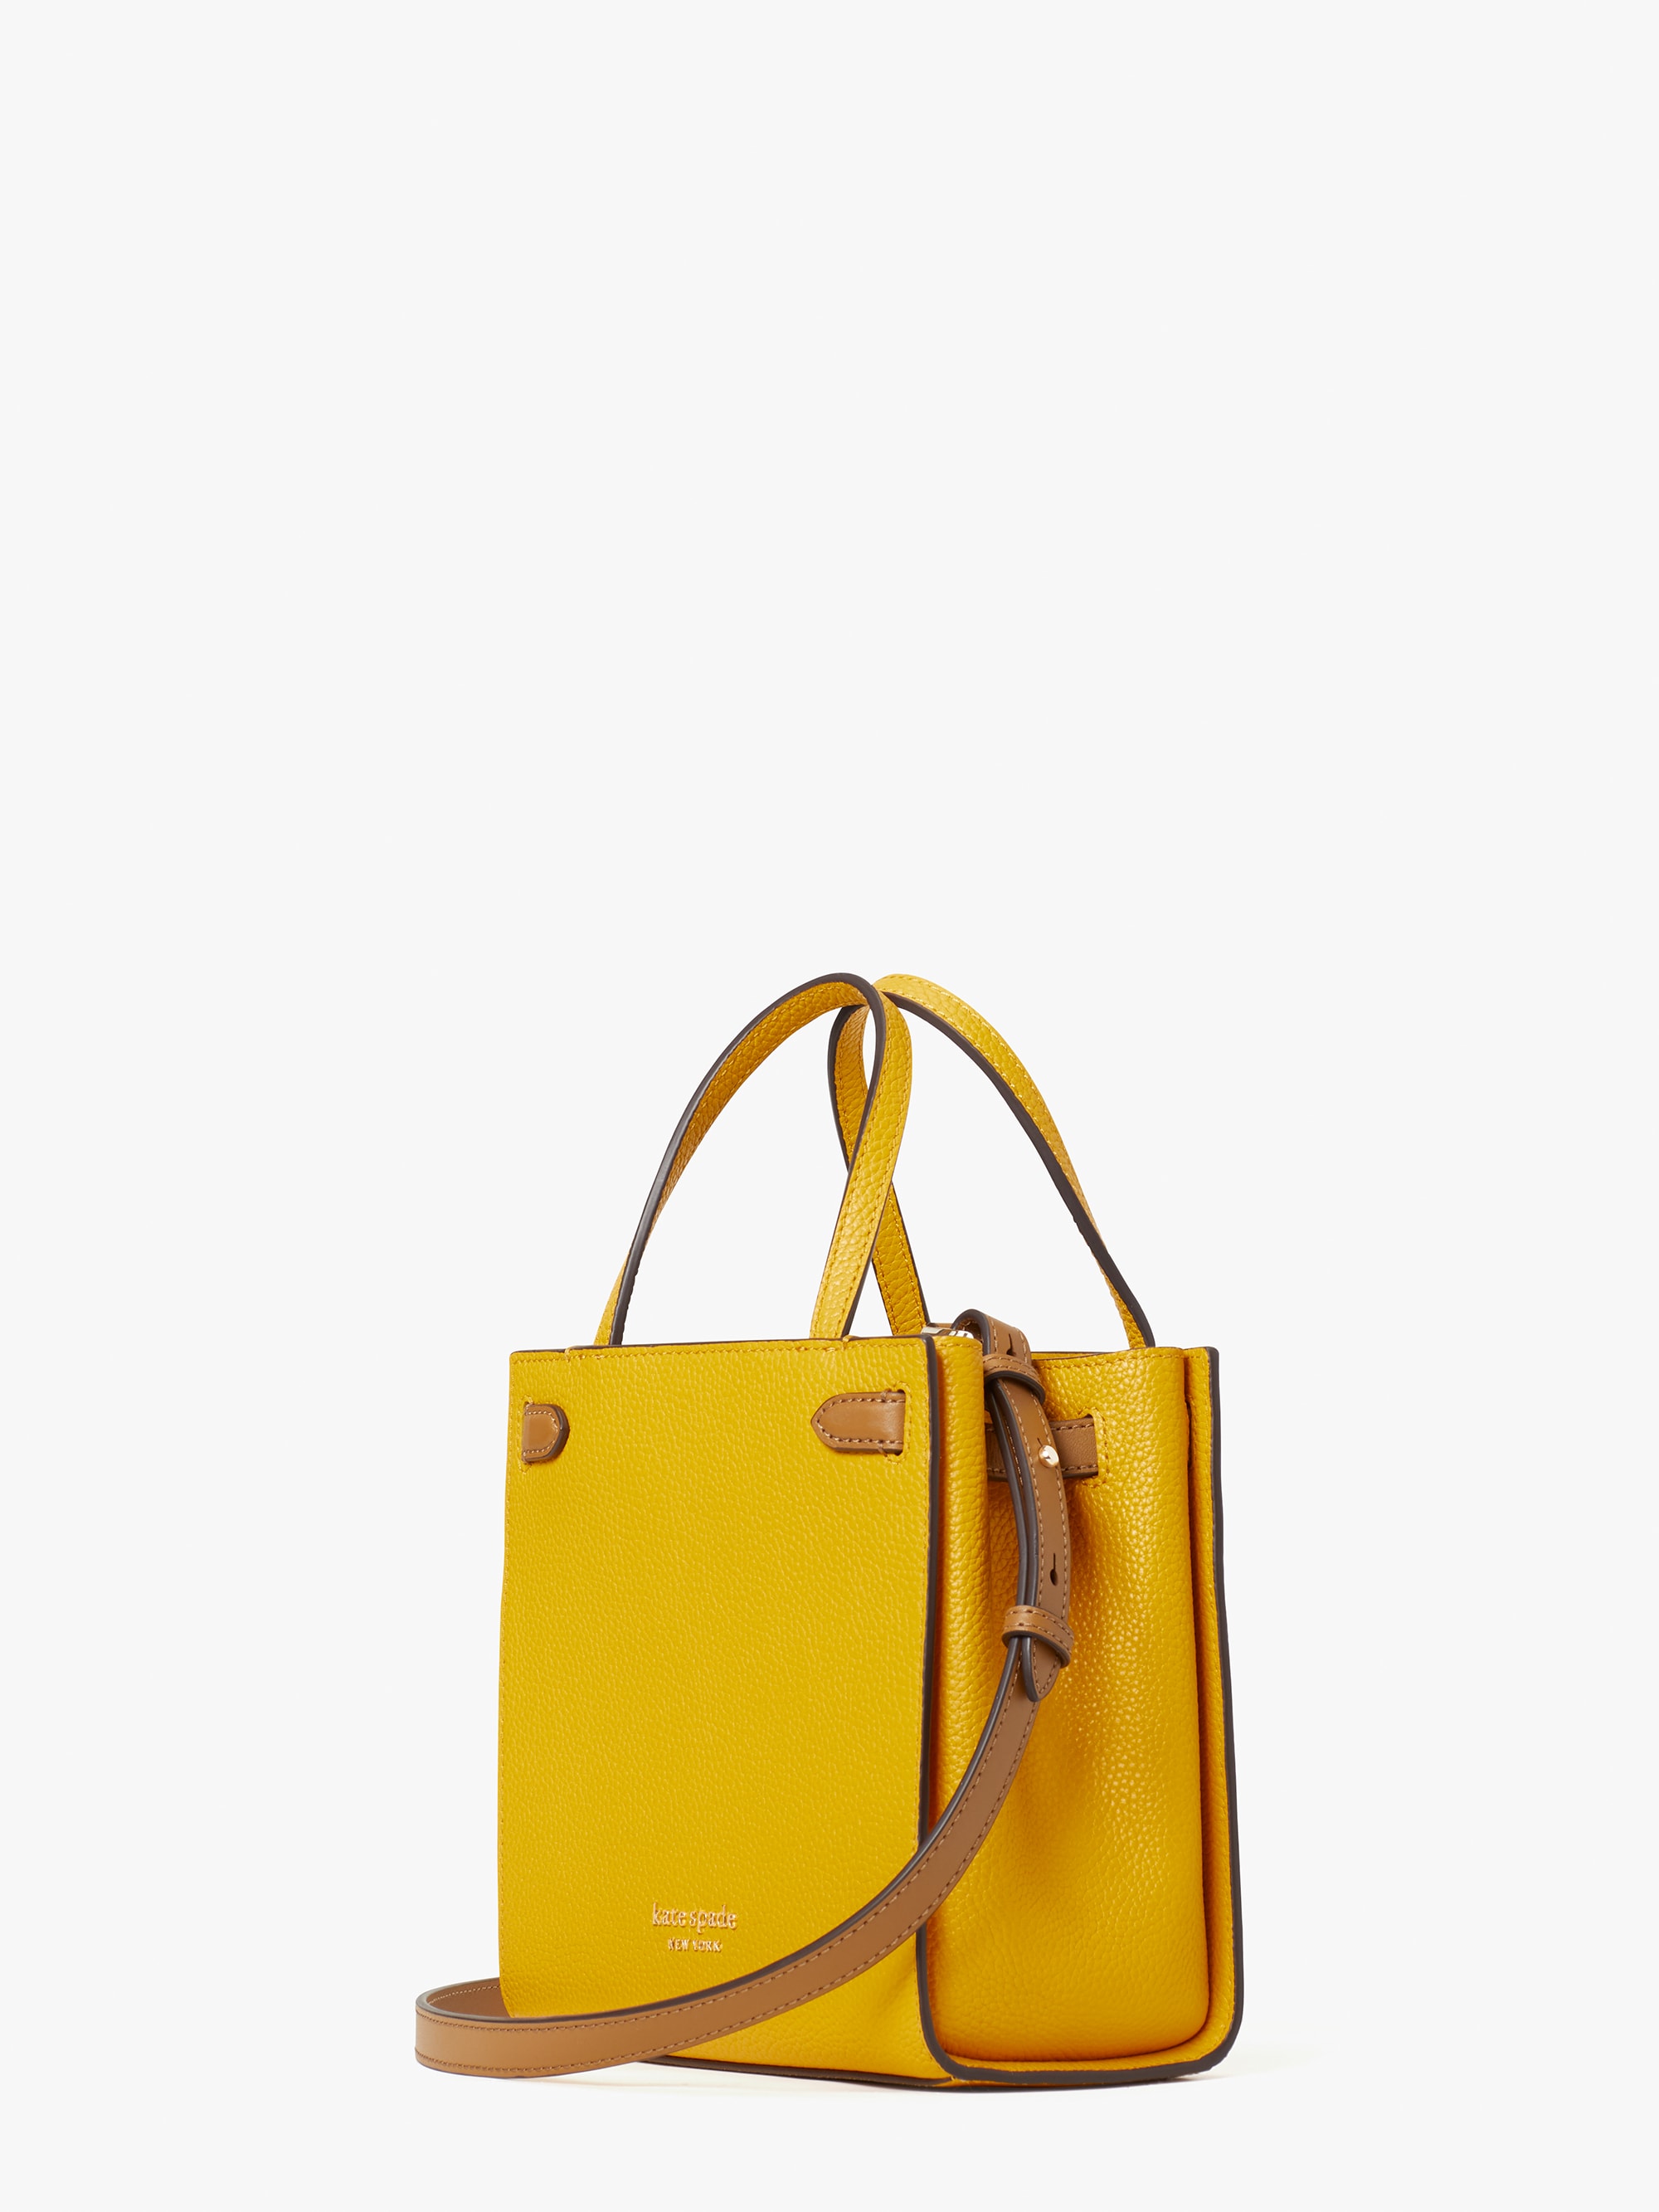 Kate Spade Lane Small Satchel In Yellow Lyst 